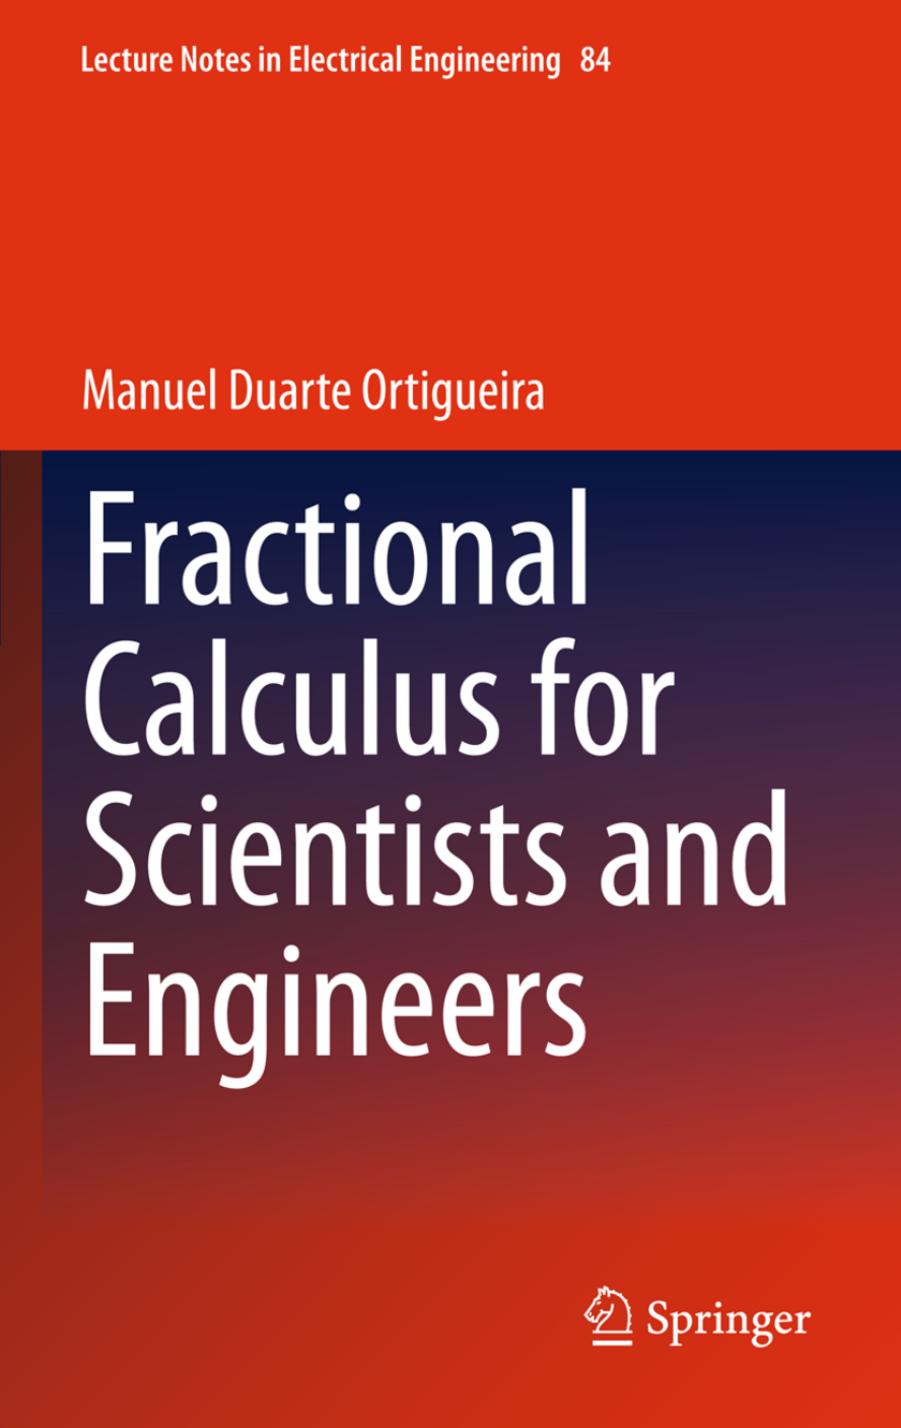 Fractional Calculus for Scientists and Engineers by Manuel Duarte Ortigueira